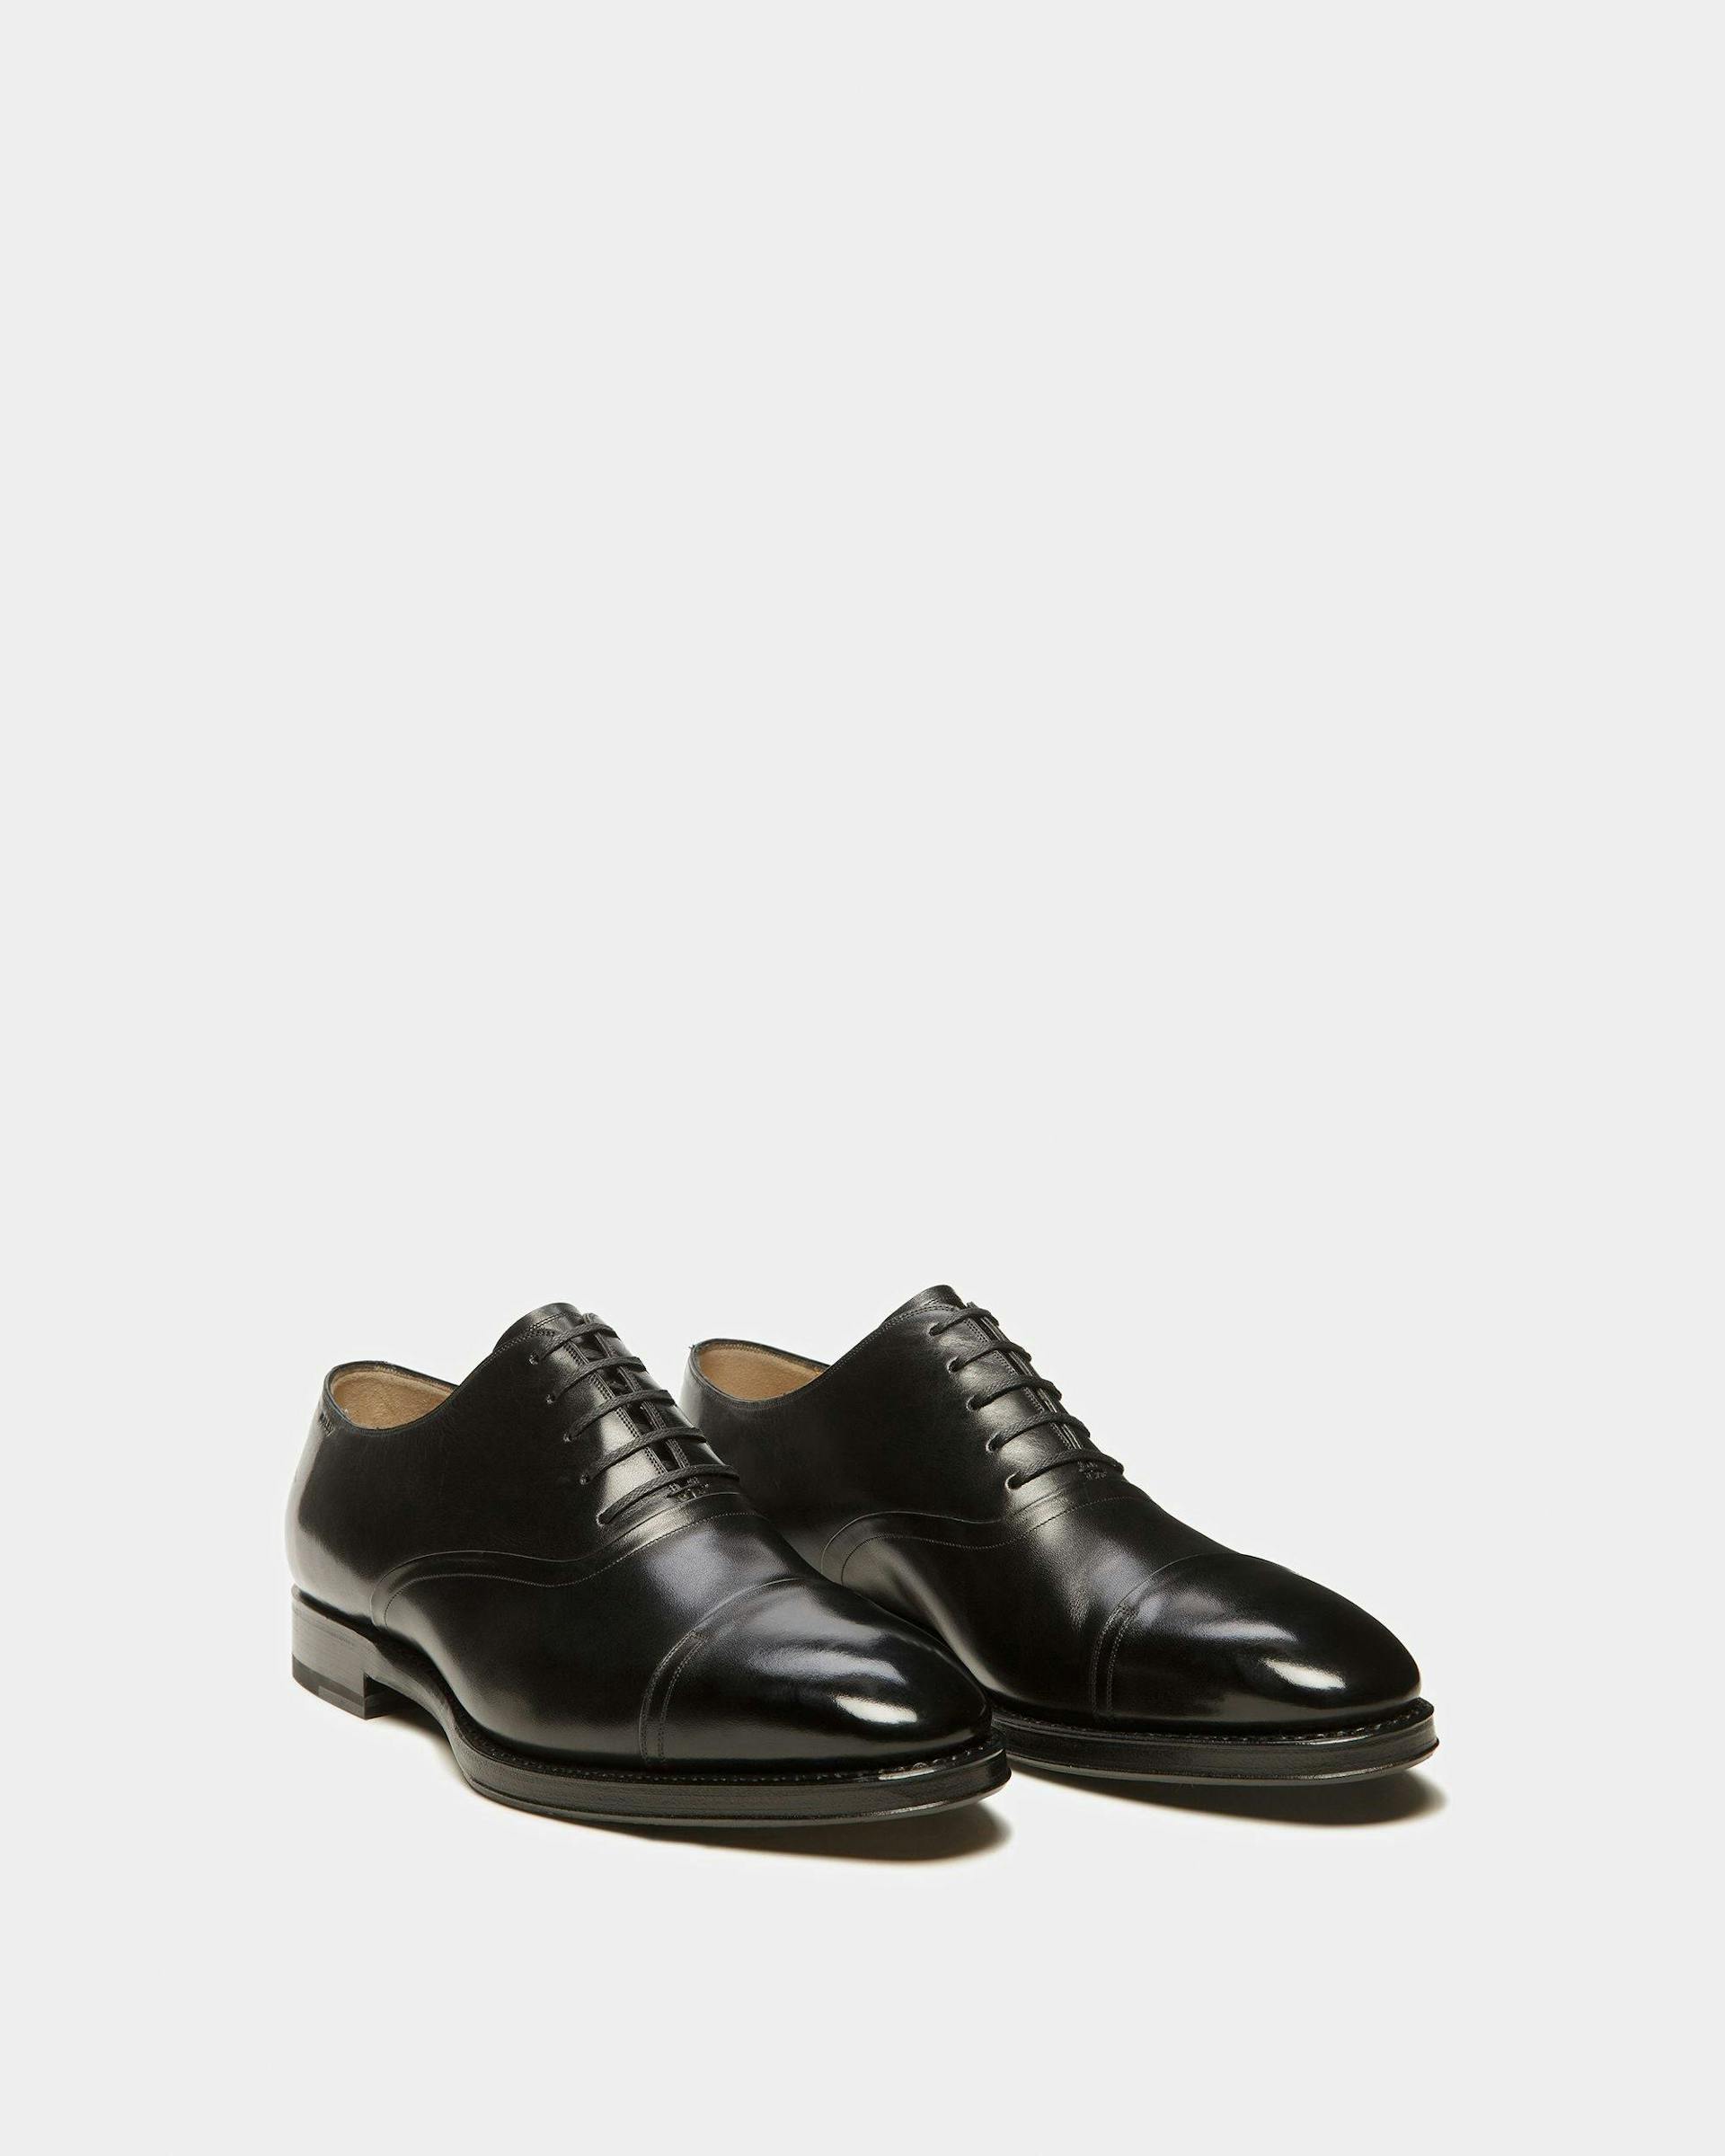 Men's Scribe Oxford Shoes In Black Leather | Bally | Still Life 3/4 Front